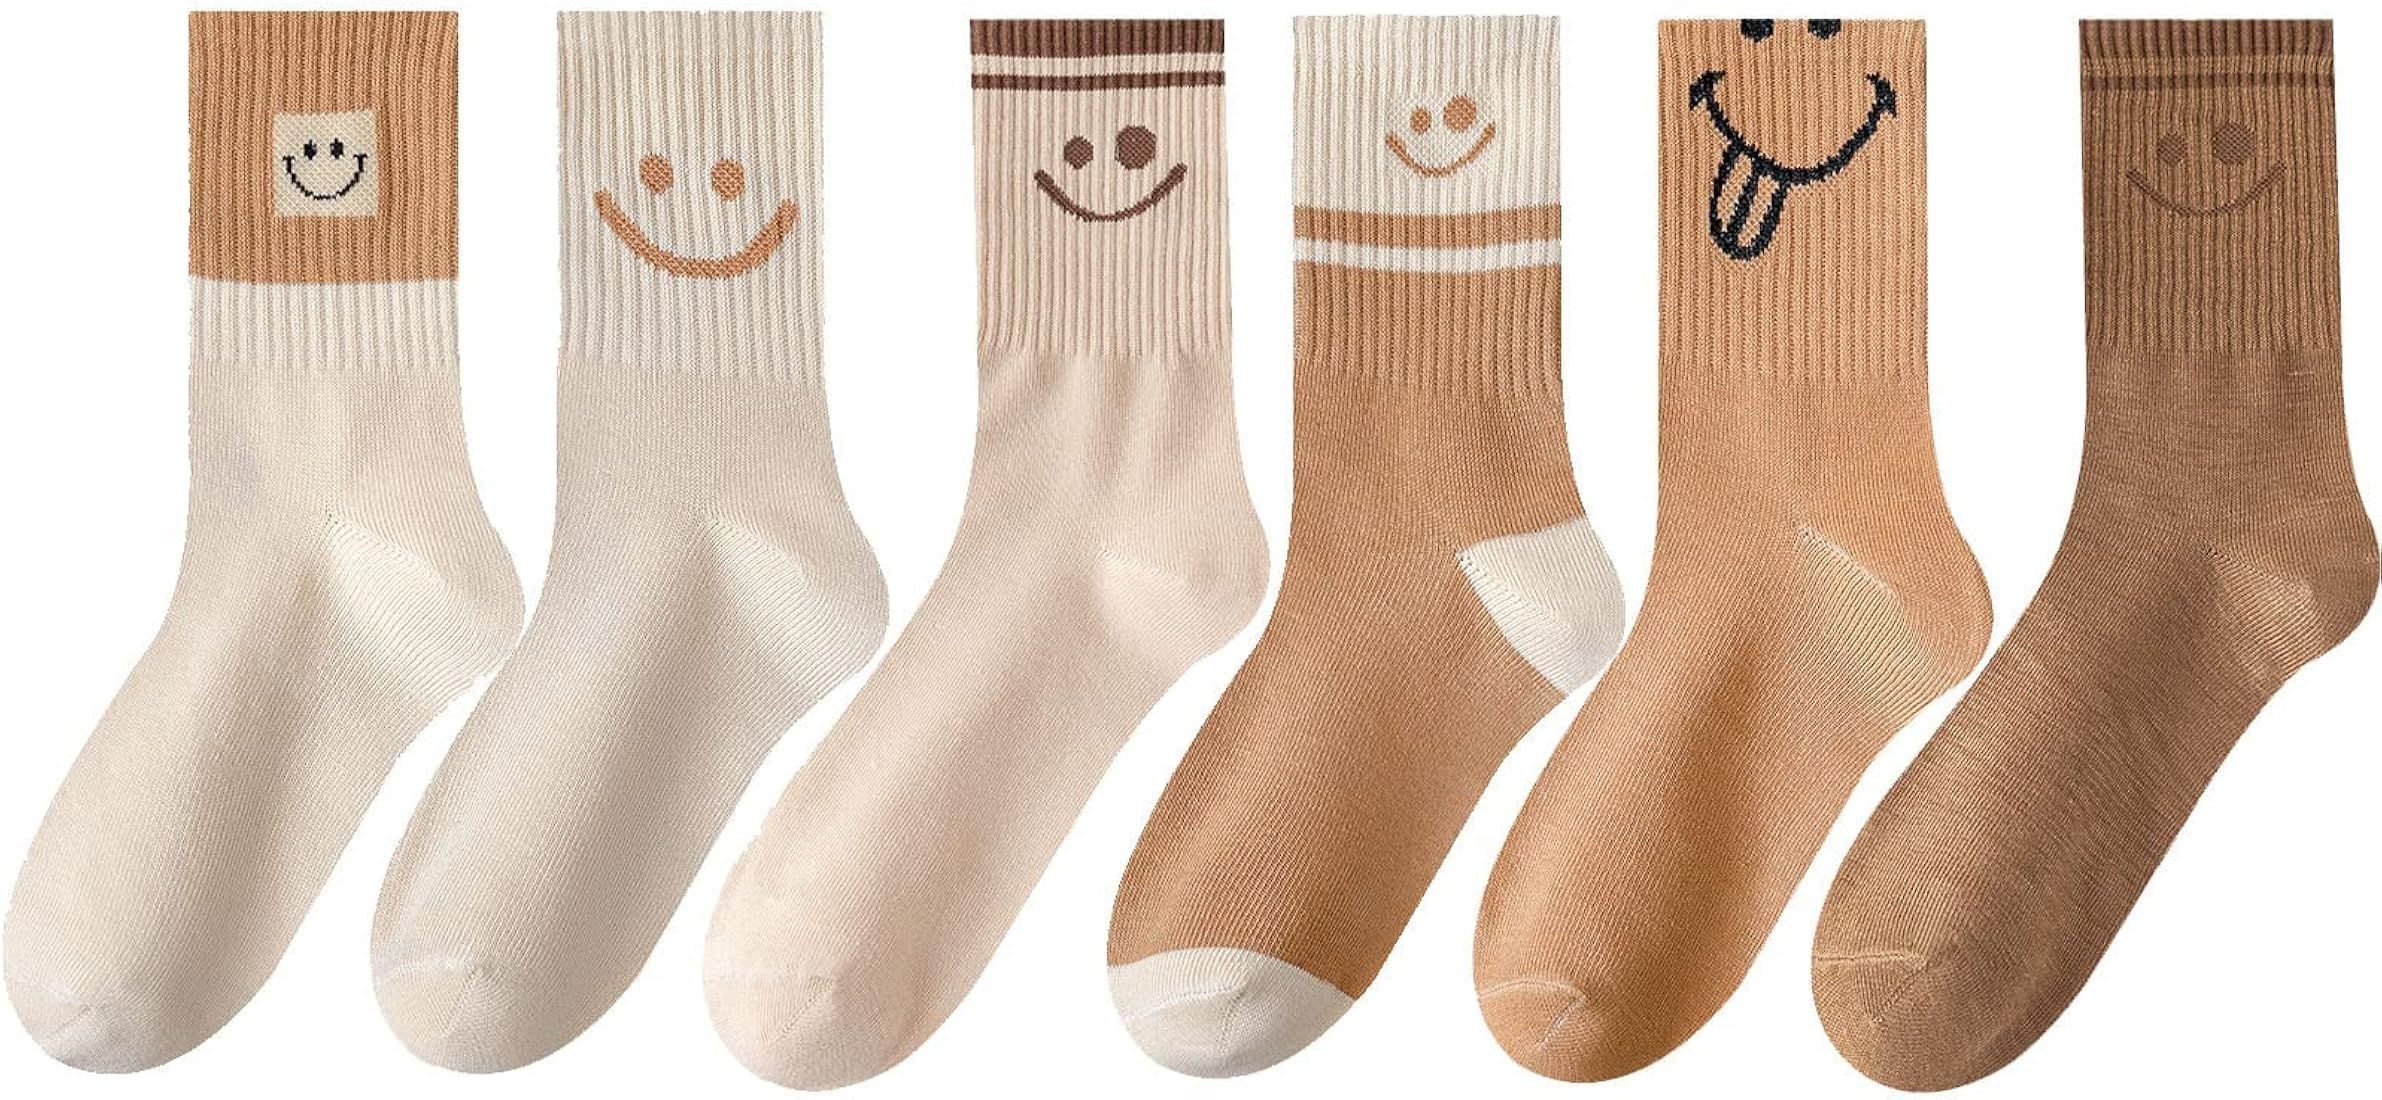 GZLXS 6 Pairs Lovely Smile Face Cotton Socks, Smiley Face Socks Womens, Cute Smiling Face Socks(6... | Amazon (US)